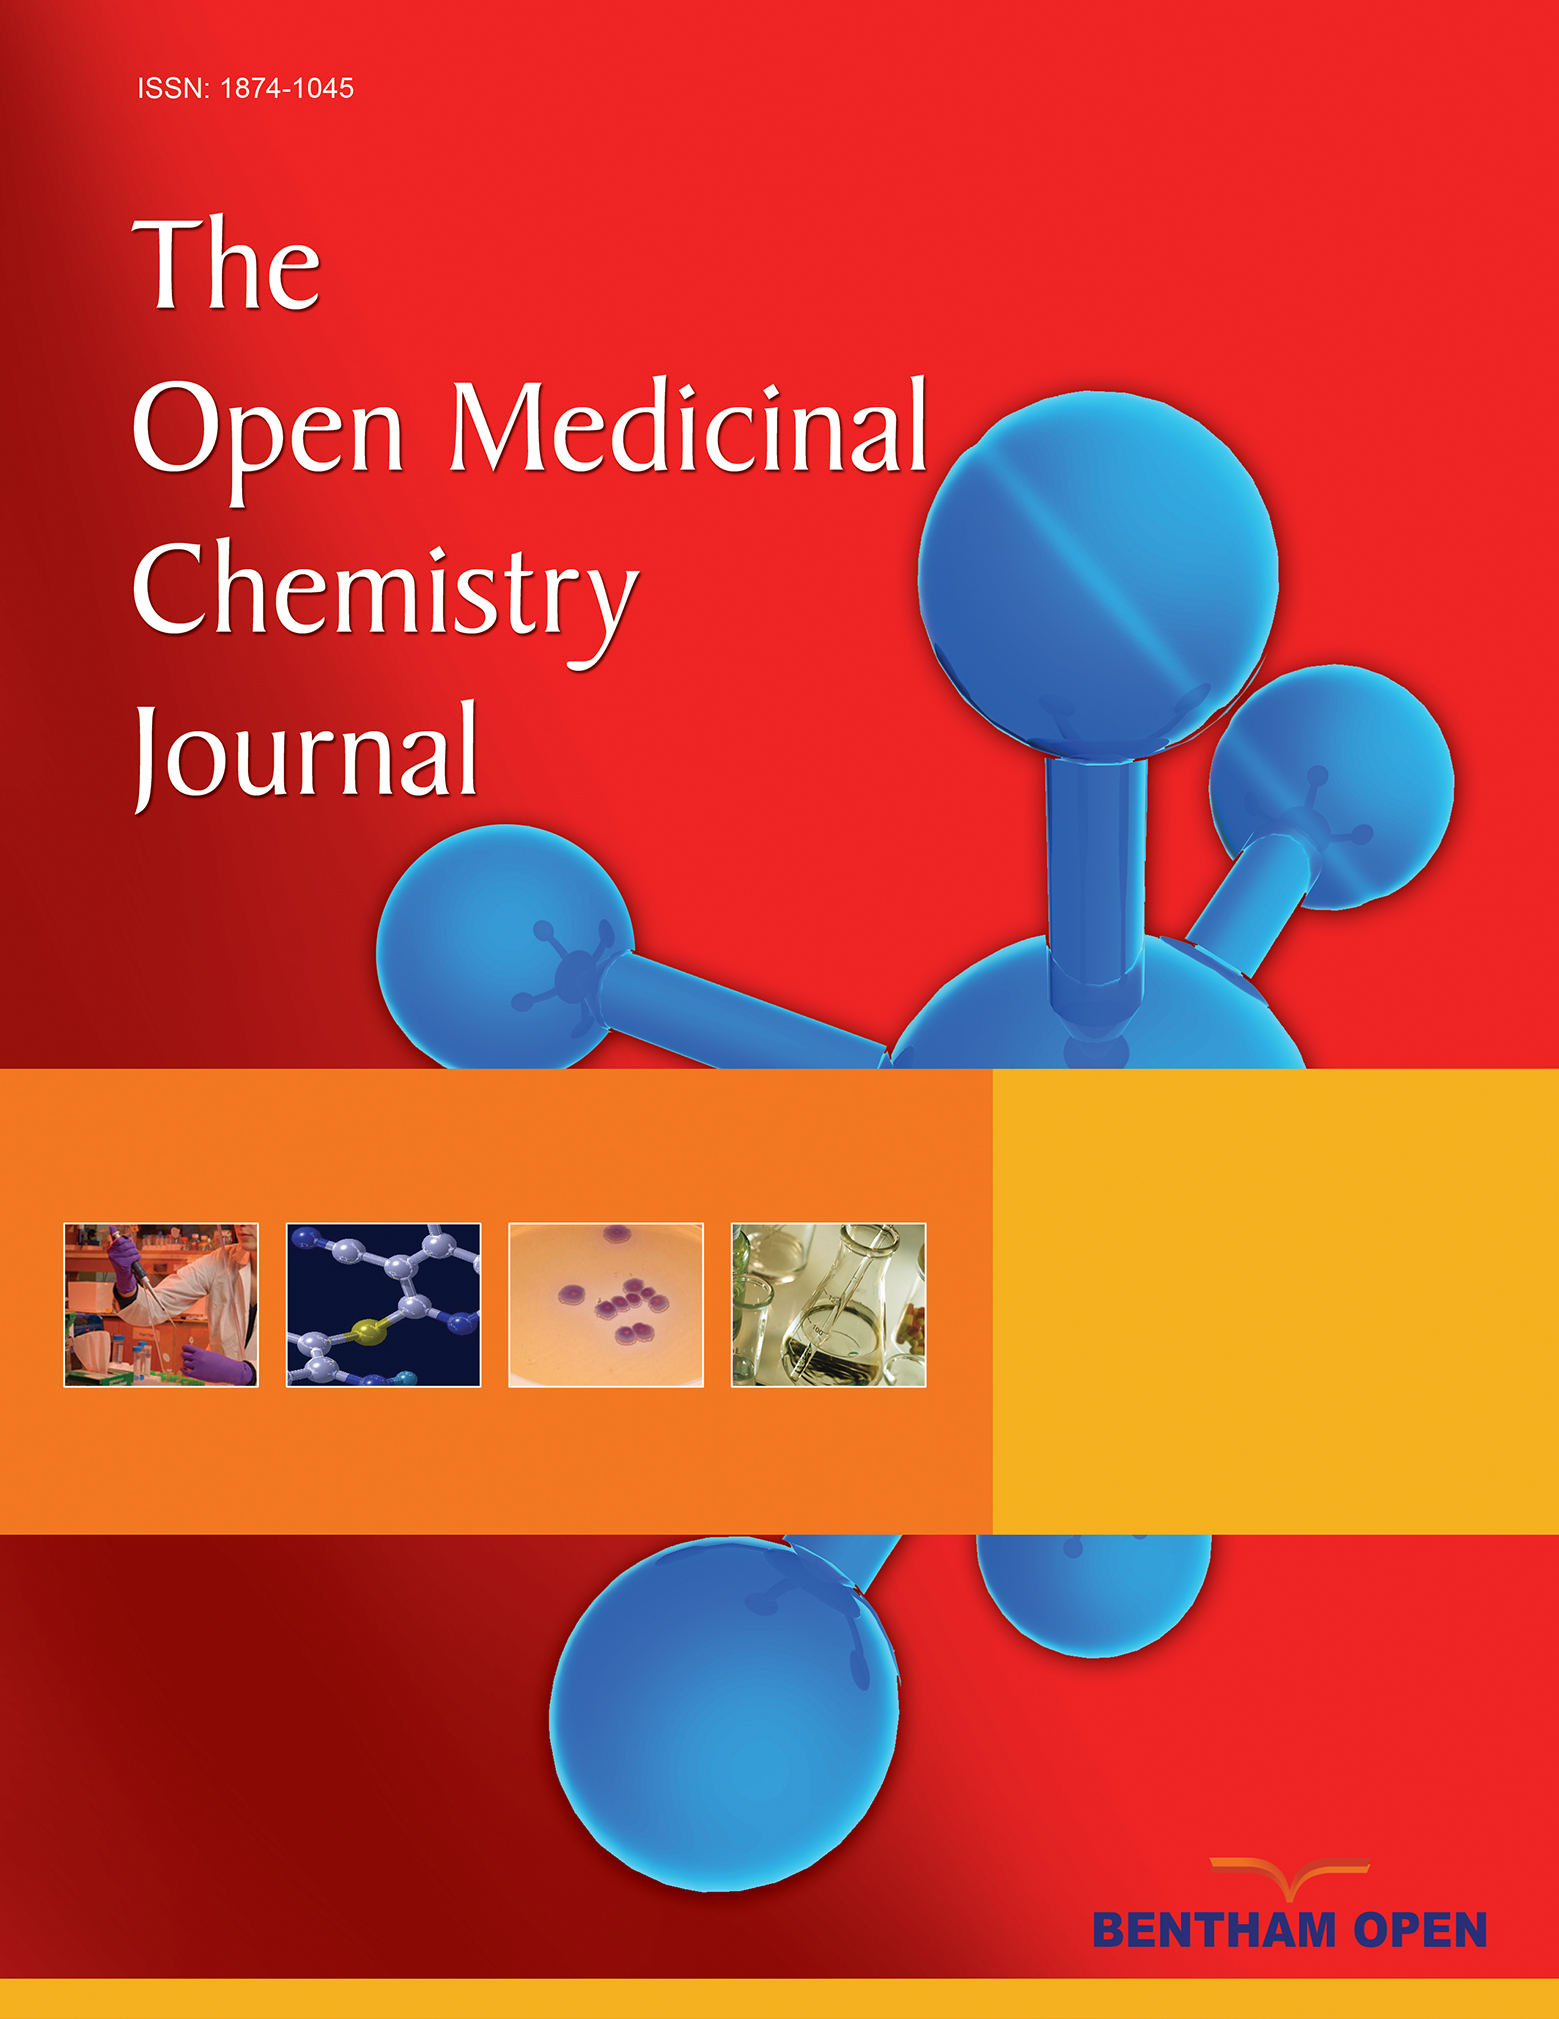 The Open Medicinal Chemistry Journal